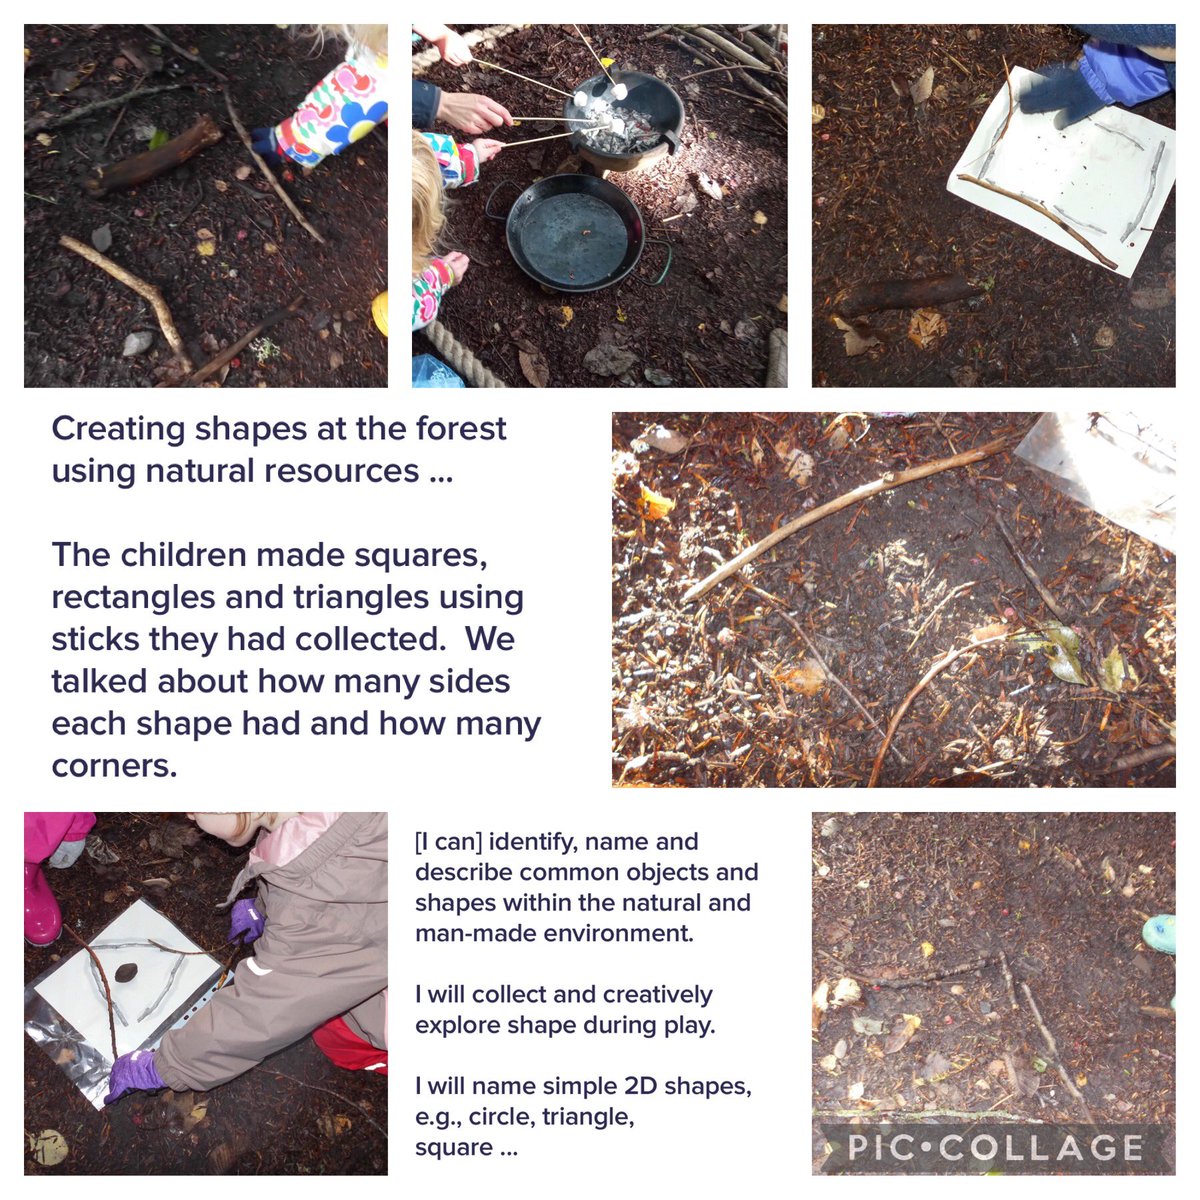 A morning at the forest and an opportunity to make shapes using twigs. Then we sat around the fire circle and made quesadillas and toasted marshmallows. #MathsWeekScot #outdoorlearning #forestlearning #pledgetoplay #stirlingcouncil #ELCC